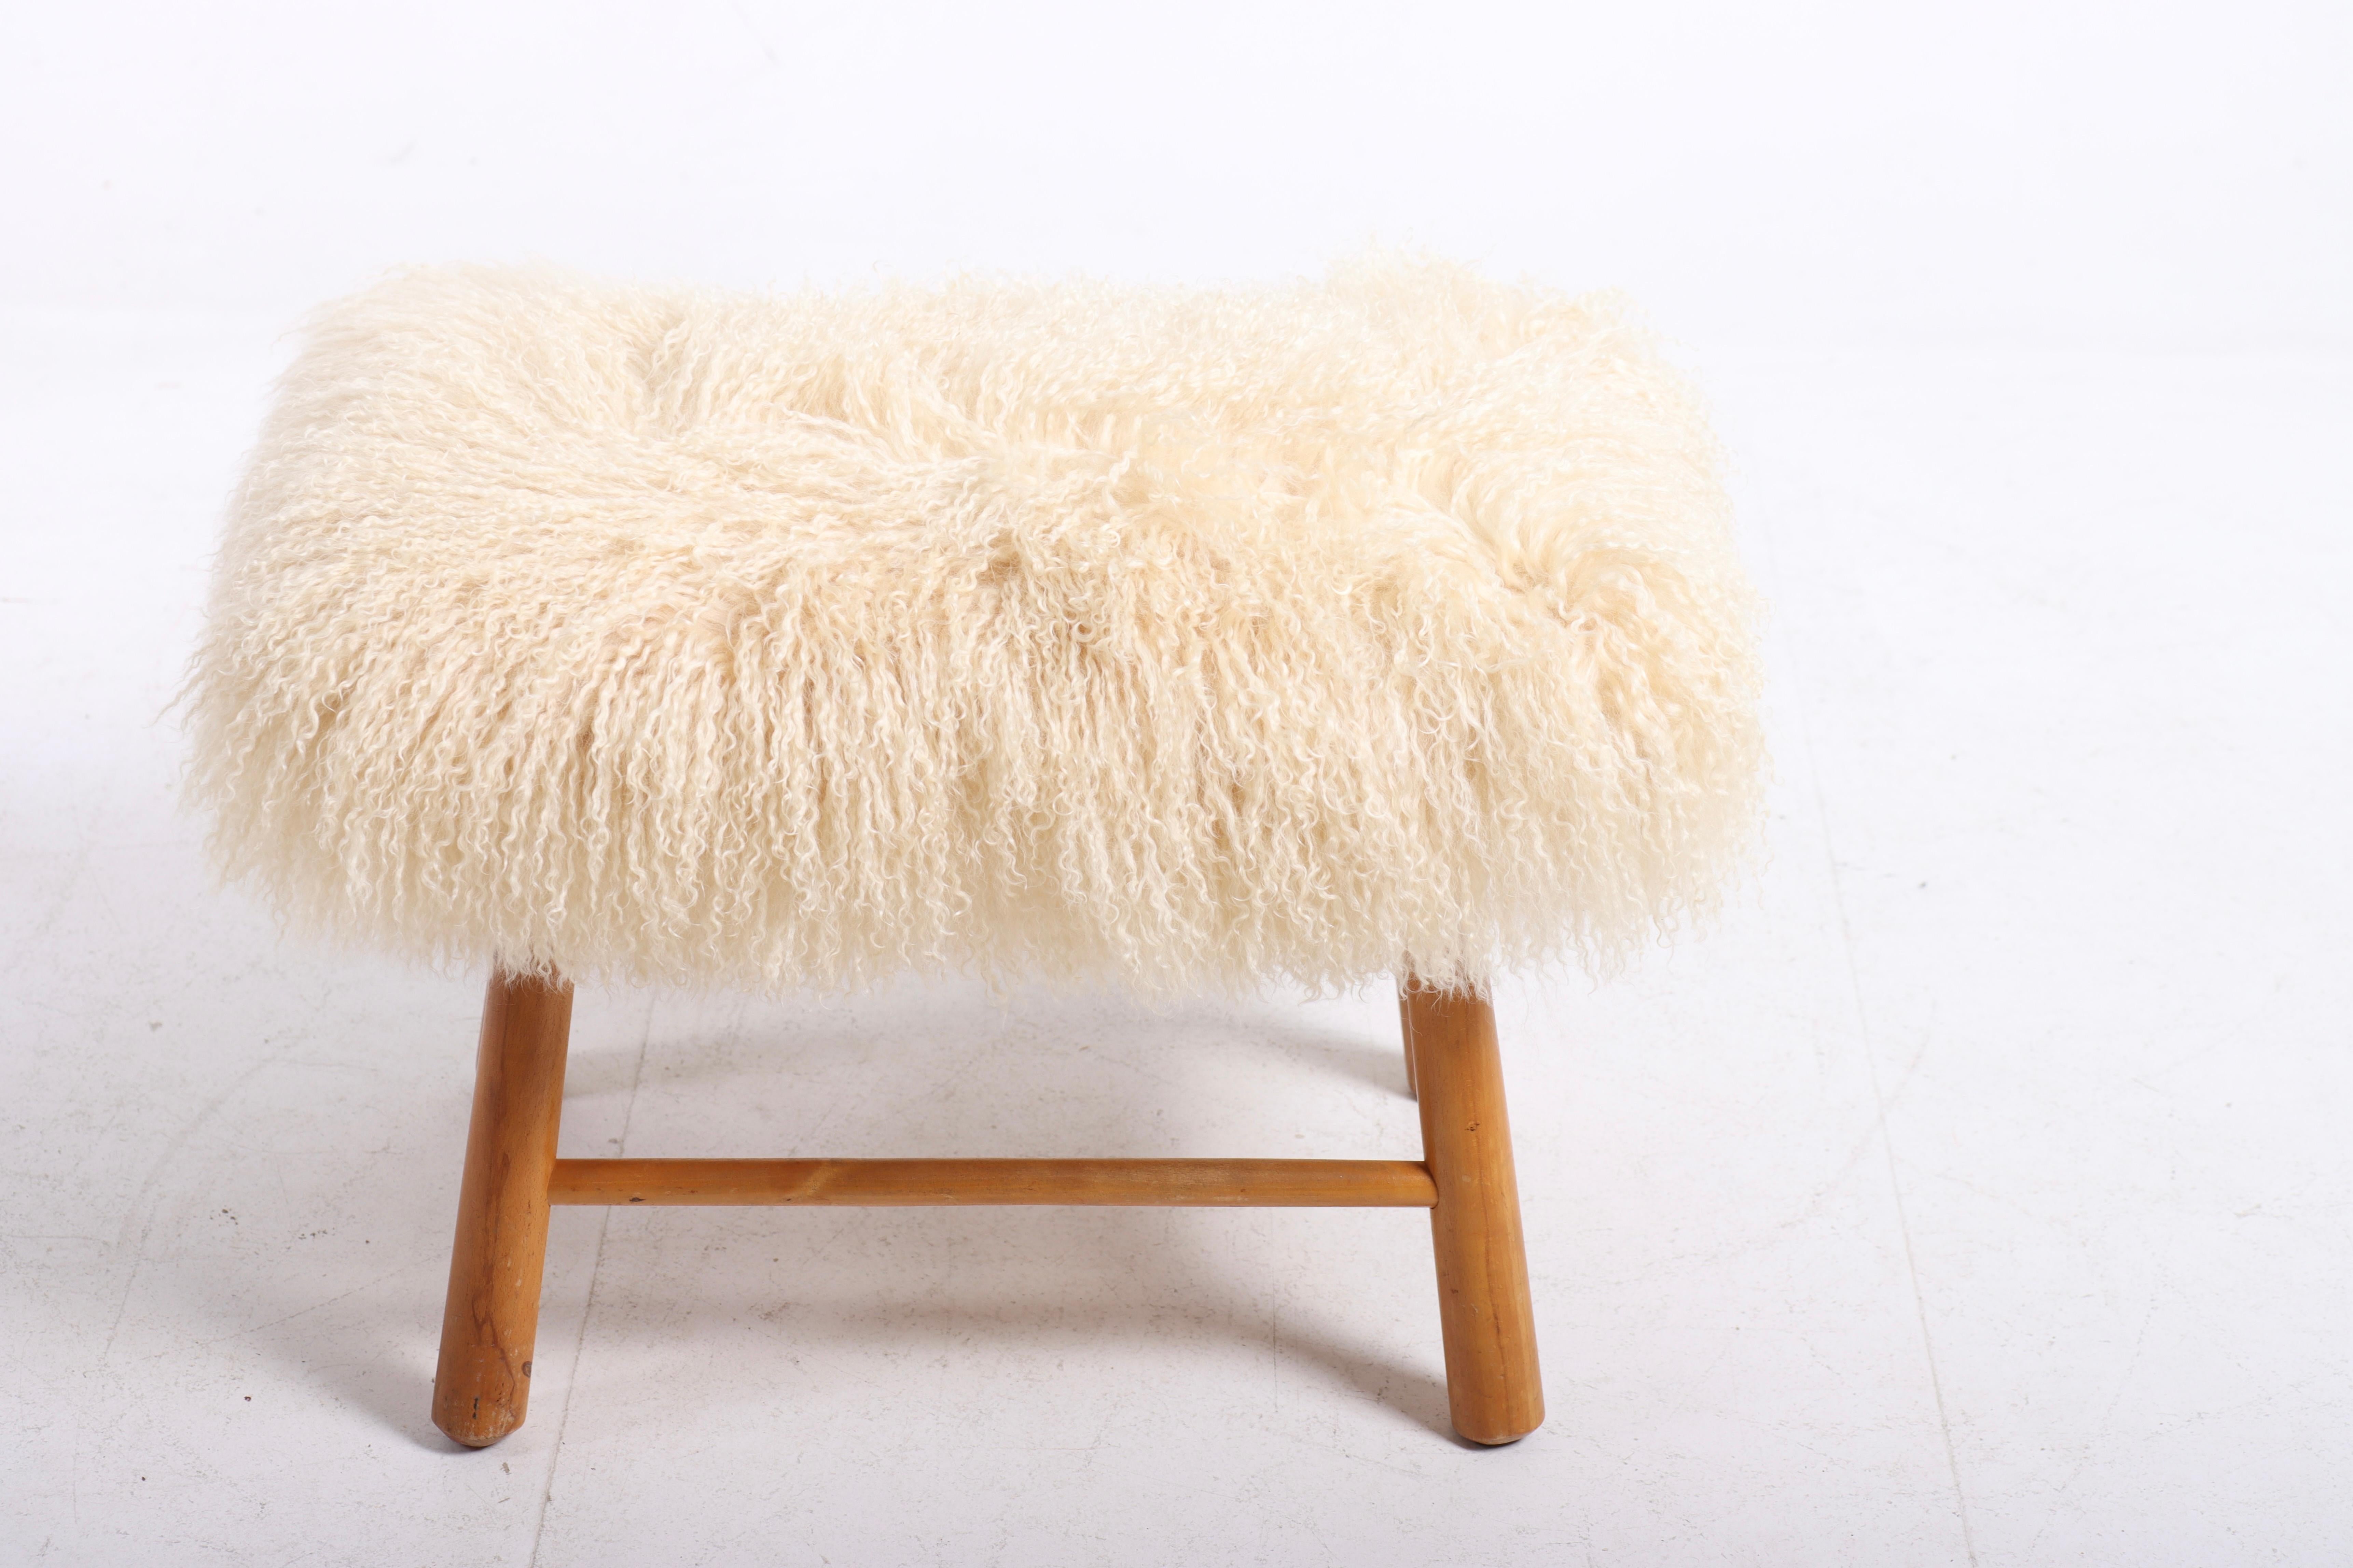 Ottoman reupholstered with sheepskin. Designed and made in Denmark. Great condition.